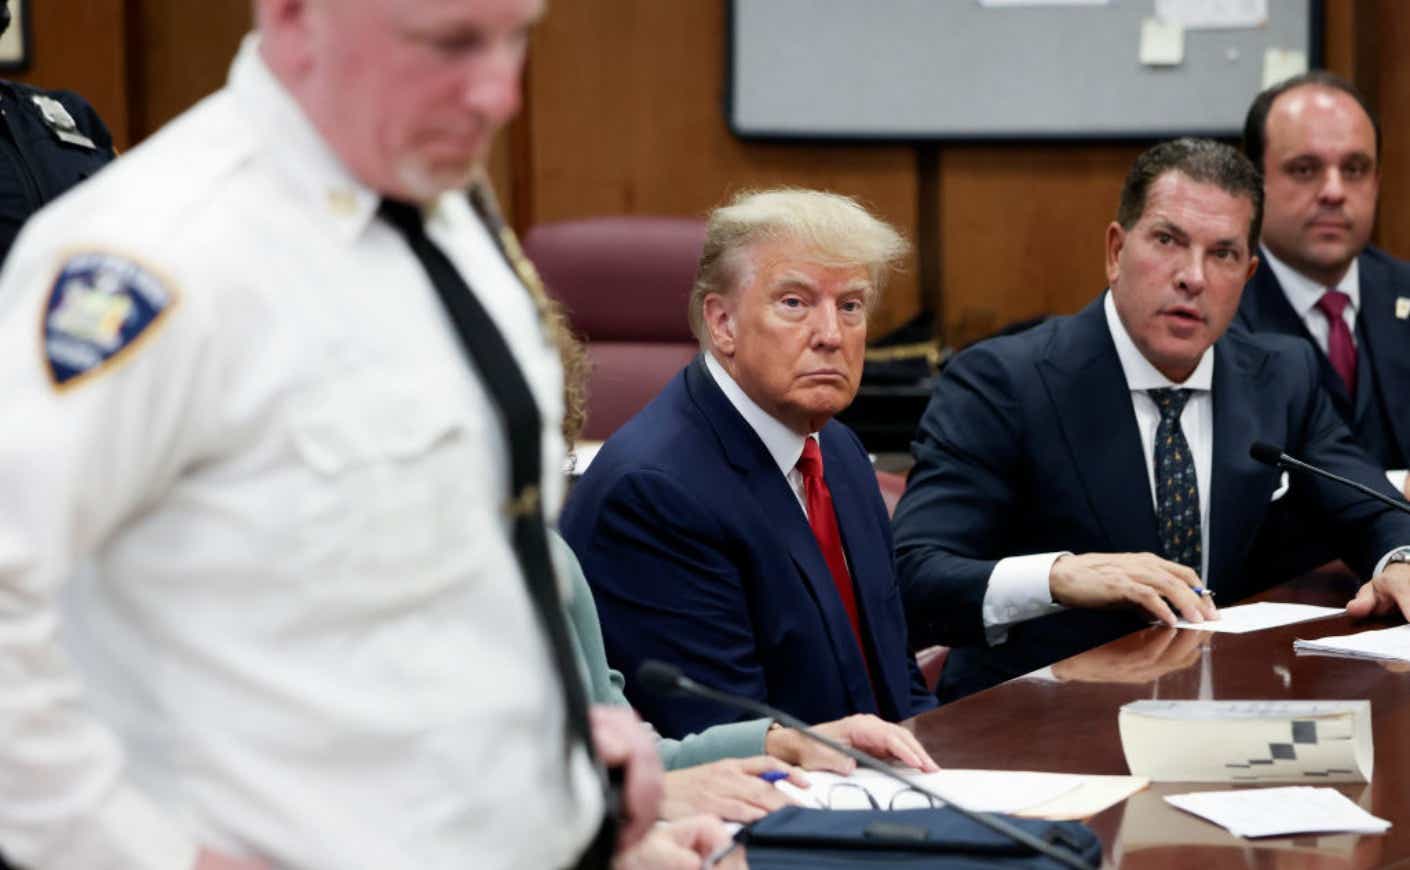 Trump sits in courtroom